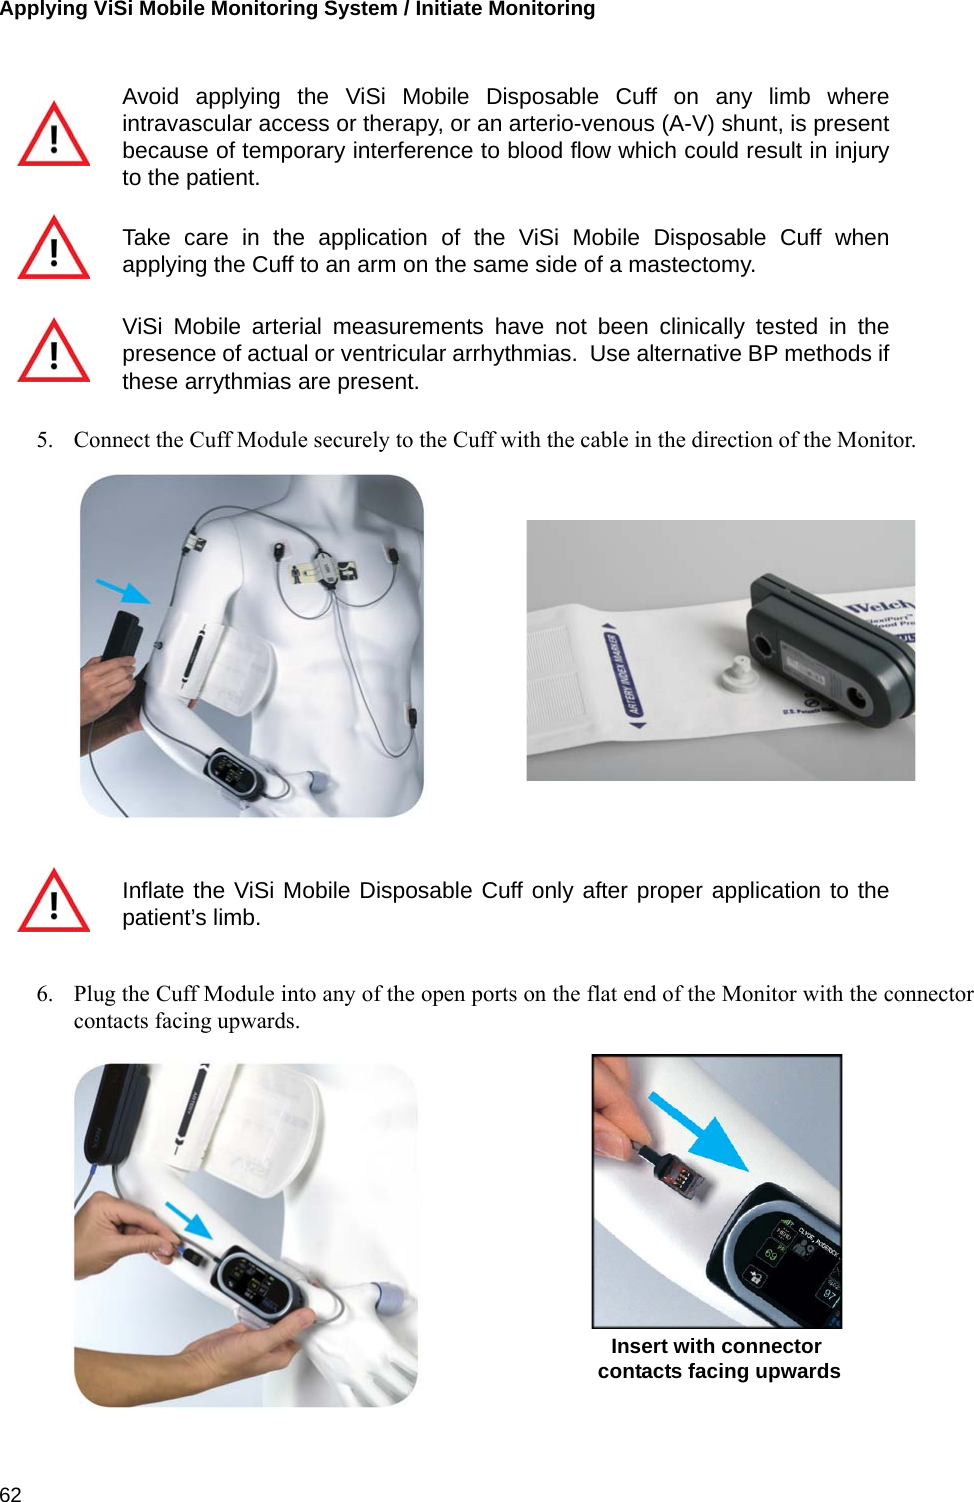 Applying ViSi Mobile Monitoring System / Initiate Monitoring 625. Connect the Cuff Module securely to the Cuff with the cable in the direction of the Monitor.6. Plug the Cuff Module into any of the open ports on the flat end of the Monitor with the connectorcontacts facing upwards.Avoid applying the ViSi Mobile Disposable Cuff on any limb whereintravascular access or therapy, or an arterio-venous (A-V) shunt, is presentbecause of temporary interference to blood flow which could result in injuryto the patient.Take care in the application of the ViSi Mobile Disposable Cuff whenapplying the Cuff to an arm on the same side of a mastectomy.ViSi Mobile arterial measurements have not been clinically tested in thepresence of actual or ventricular arrhythmias.  Use alternative BP methods ifthese arrythmias are present.Inflate the ViSi Mobile Disposable Cuff only after proper application to thepatient’s limb.Insert with connectorcontacts facing upwards